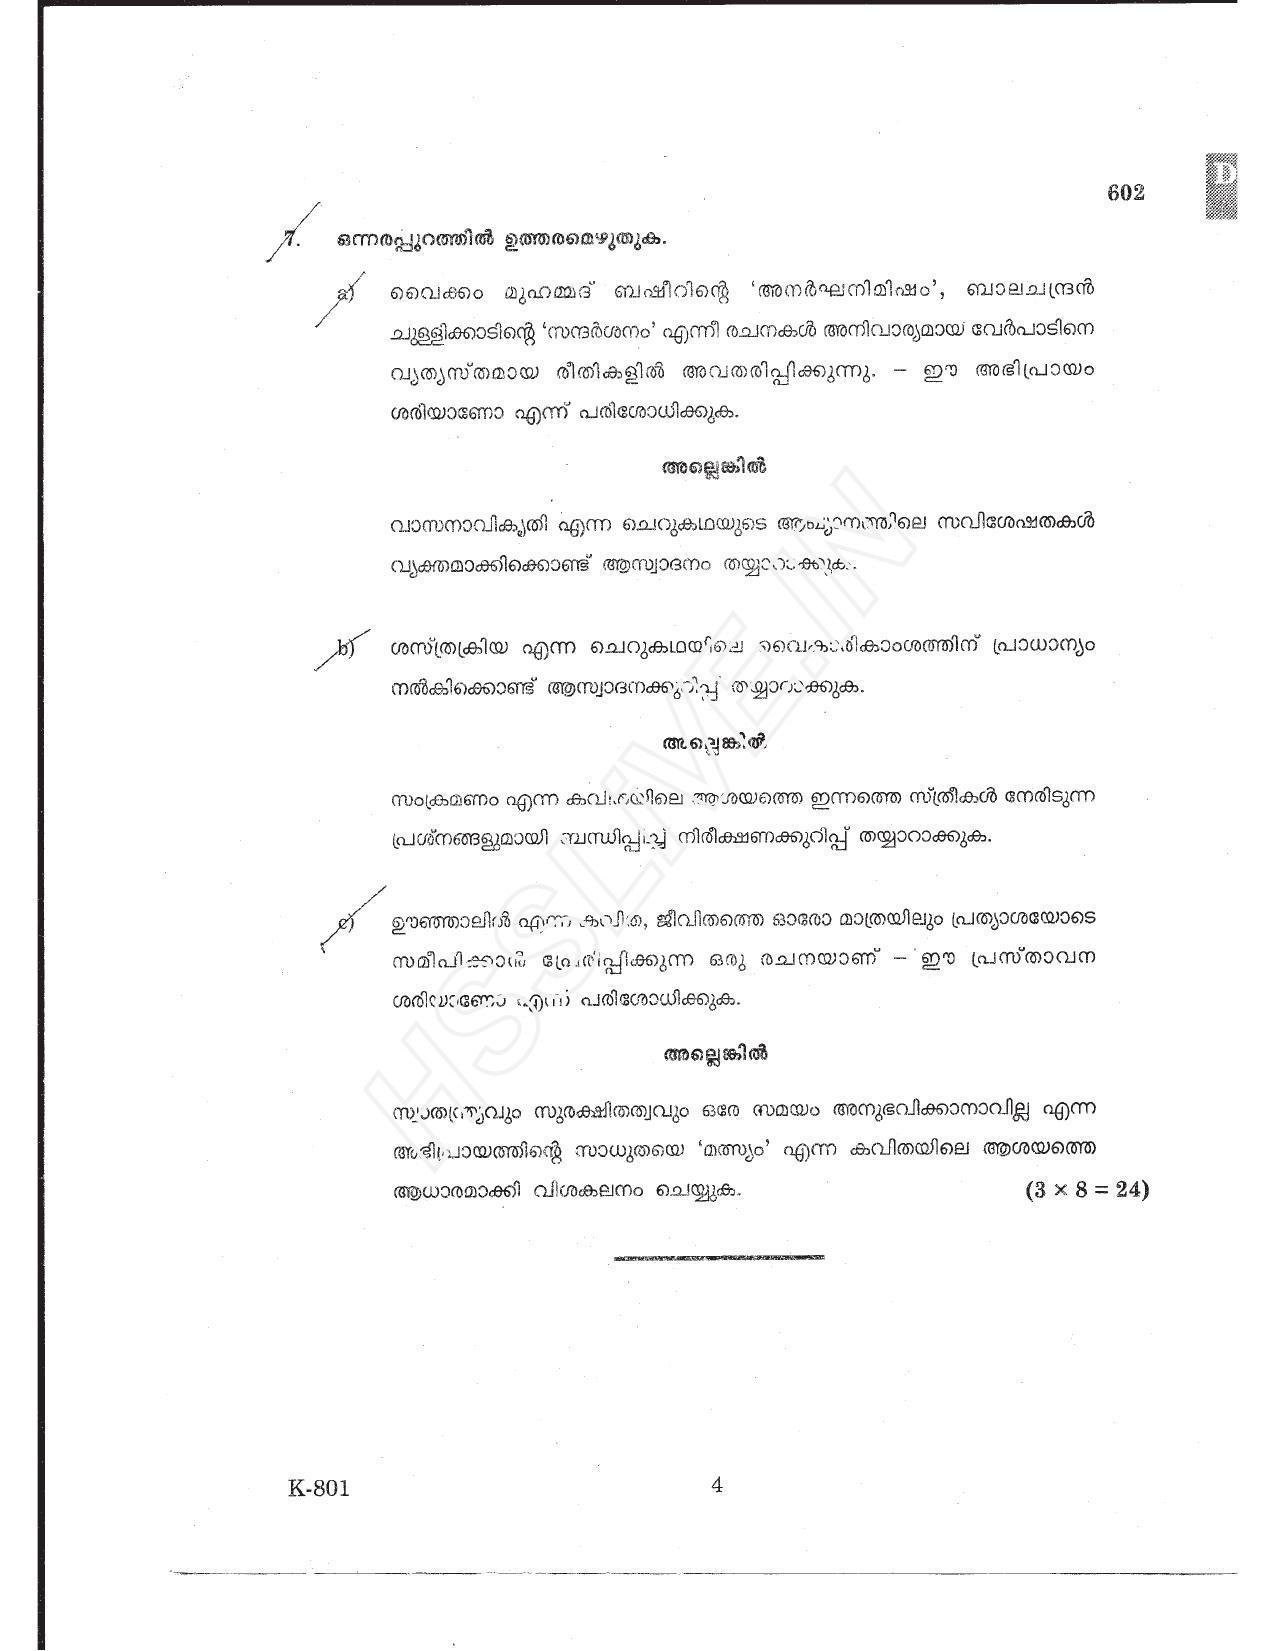 Kerala Plus One 2017 Malayalam Question Papers - Page 4